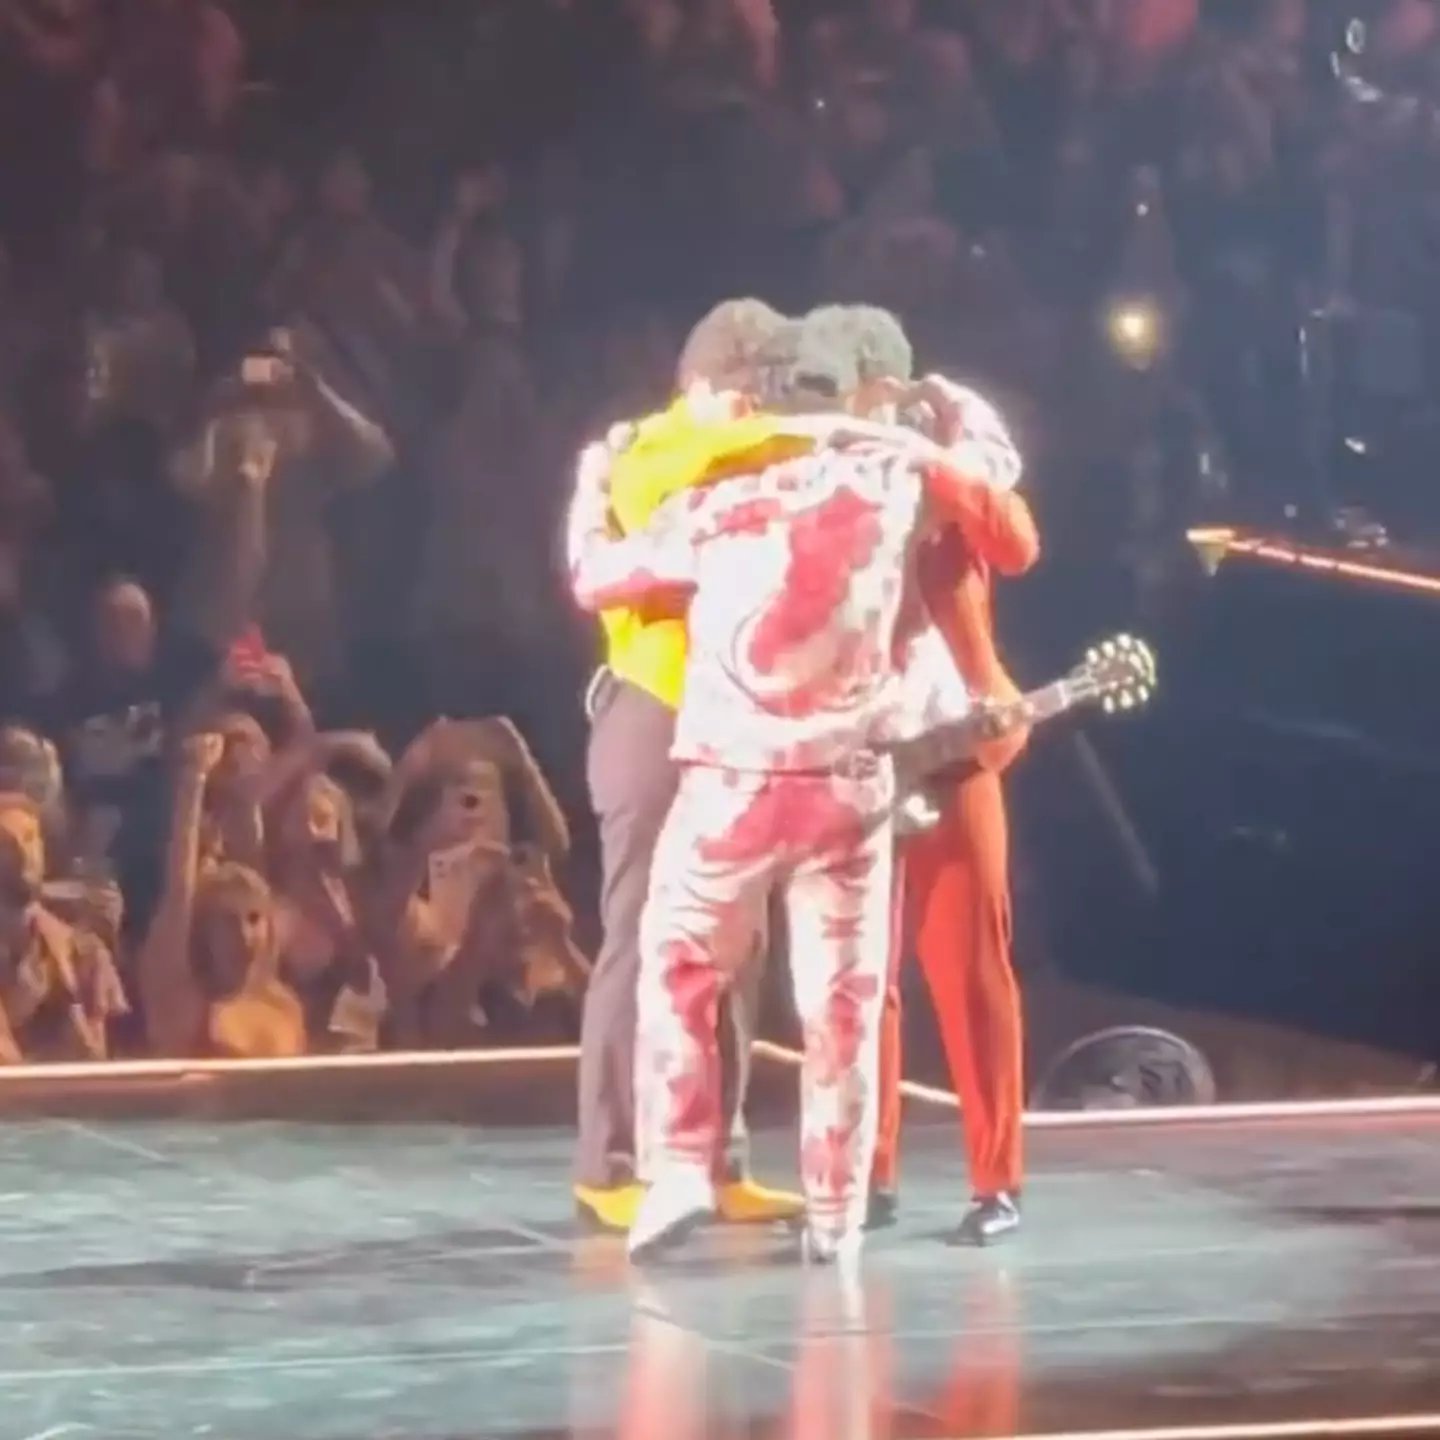 The trio had a group hug on stage.